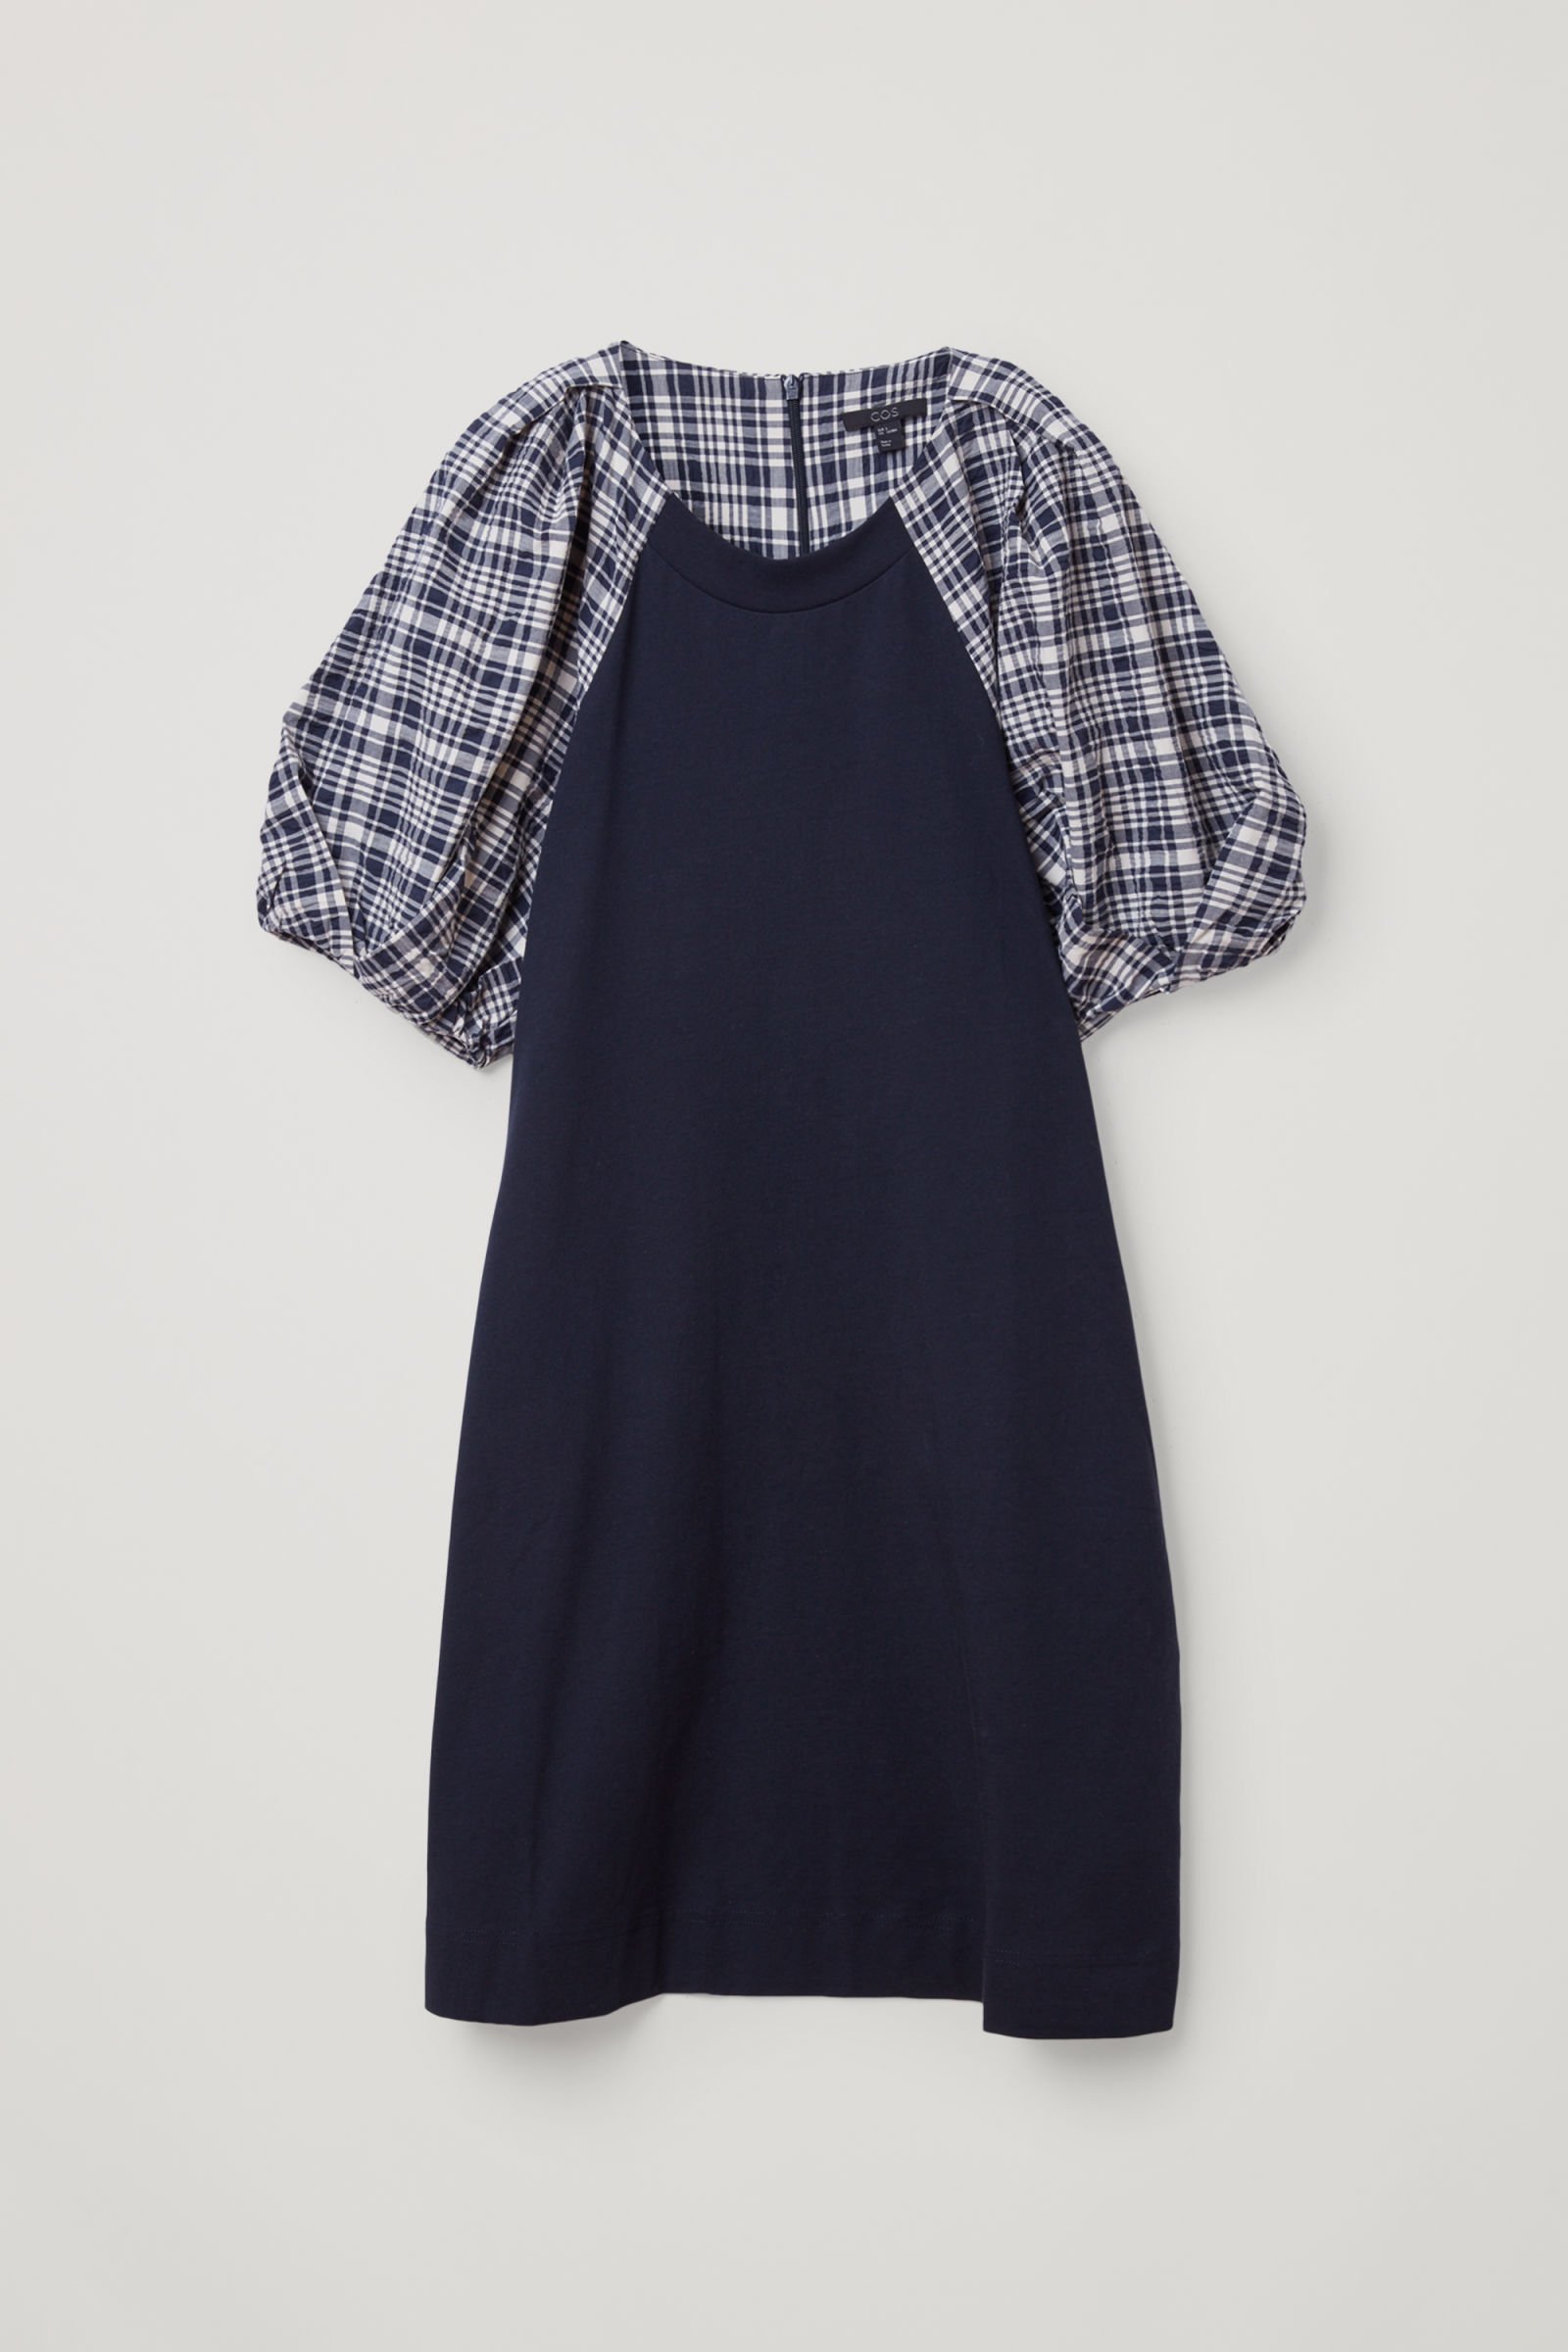 COS Check Puff Sleeve Cotton Dress in navy / white